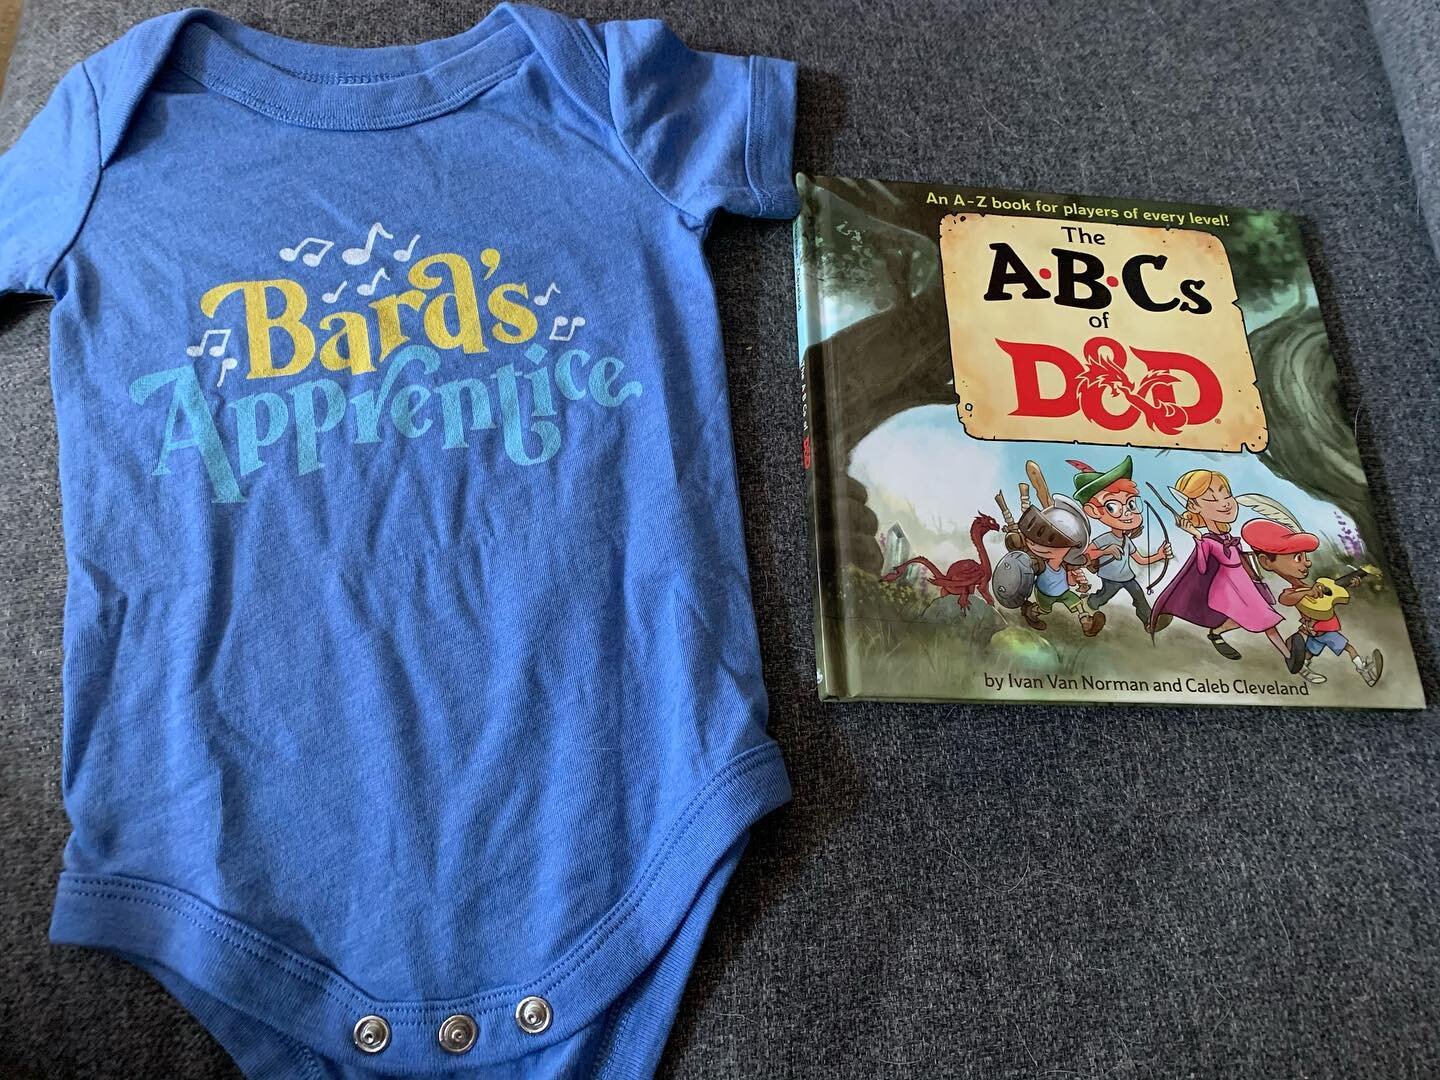 My D&amp;D group are lovely people! 
#dnd #dungeonsanddragons #abcsofdnd #babygrow